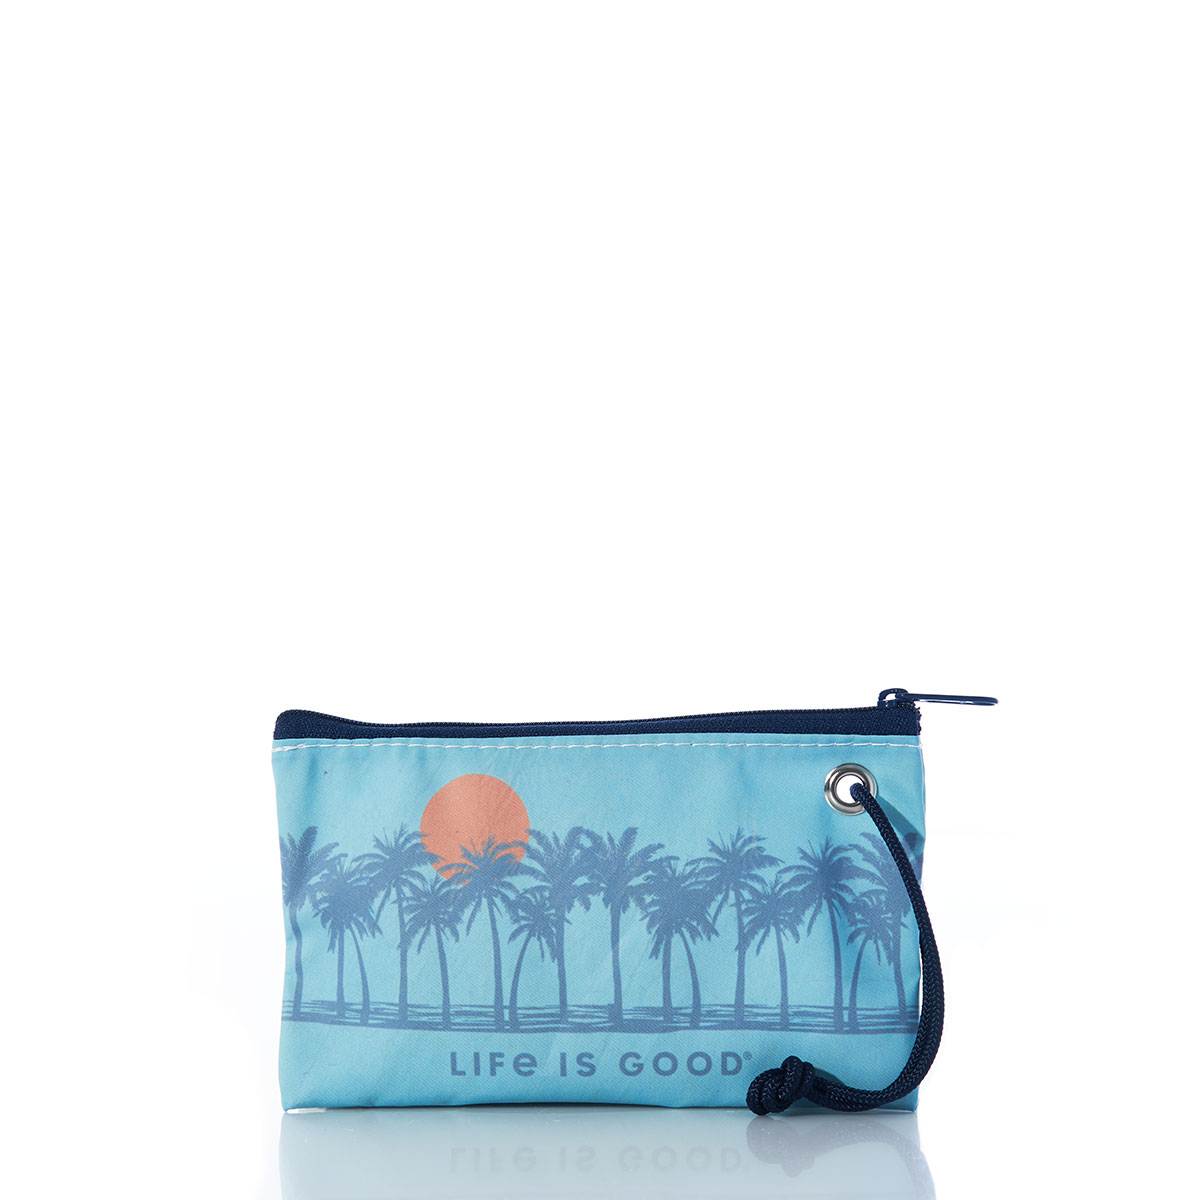 a row of palm trees in front of a rising sun printed on a blue recycled sail cloth wristlet with navy zipper and wristlet strap